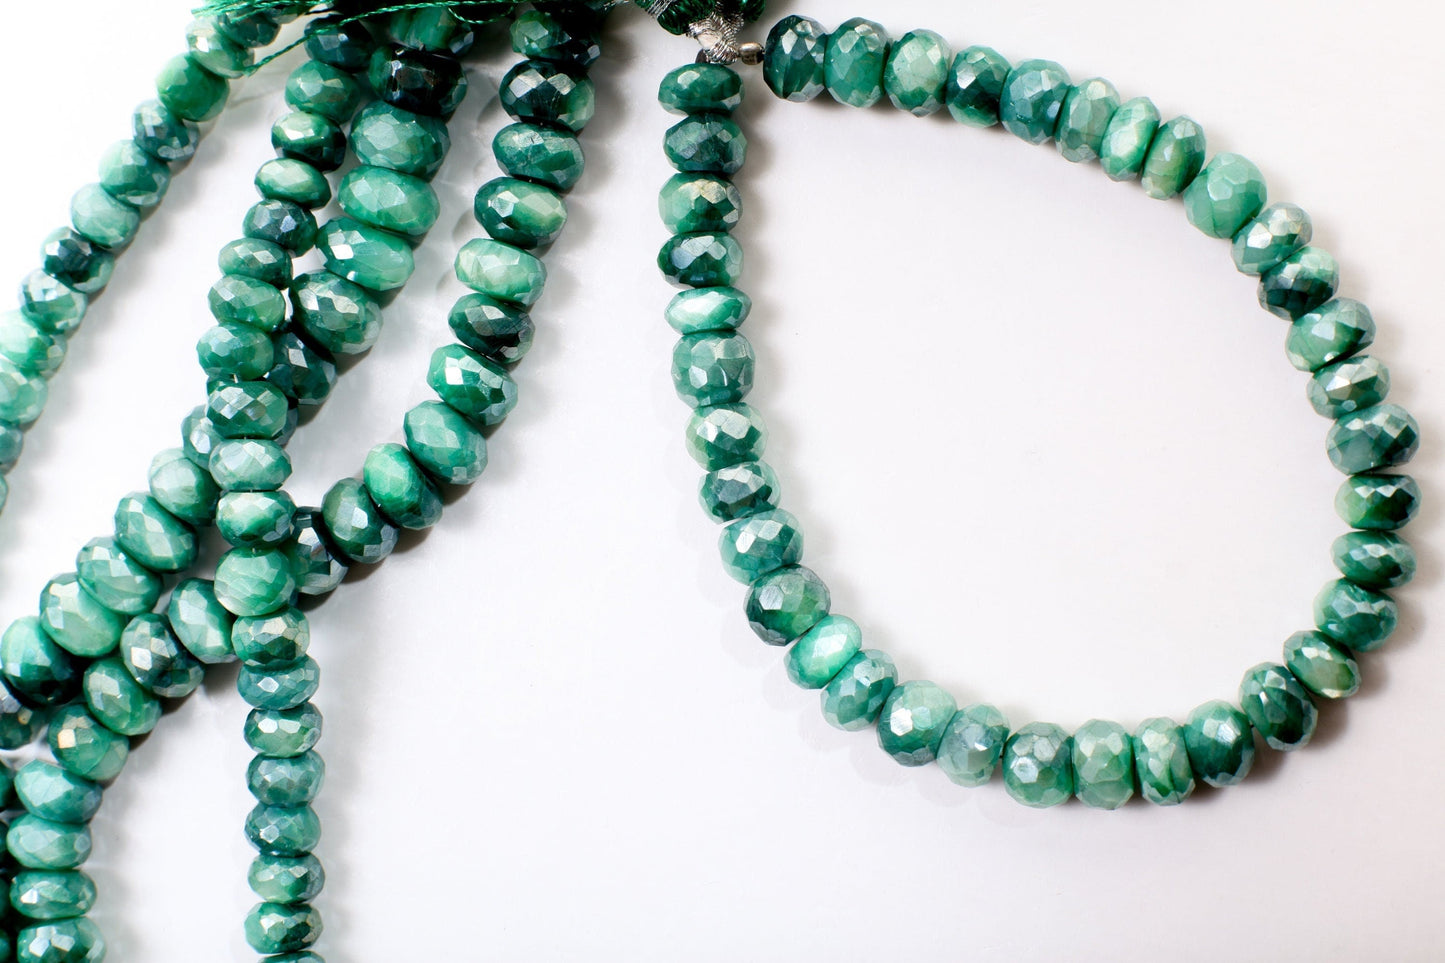 Moonstone Green Rondelle, Genuine Moonstone Emerald Green mystic Coated High Quality Faceted Roundels in 7.5-8mm Gemstone Beads 8&quot; Strand